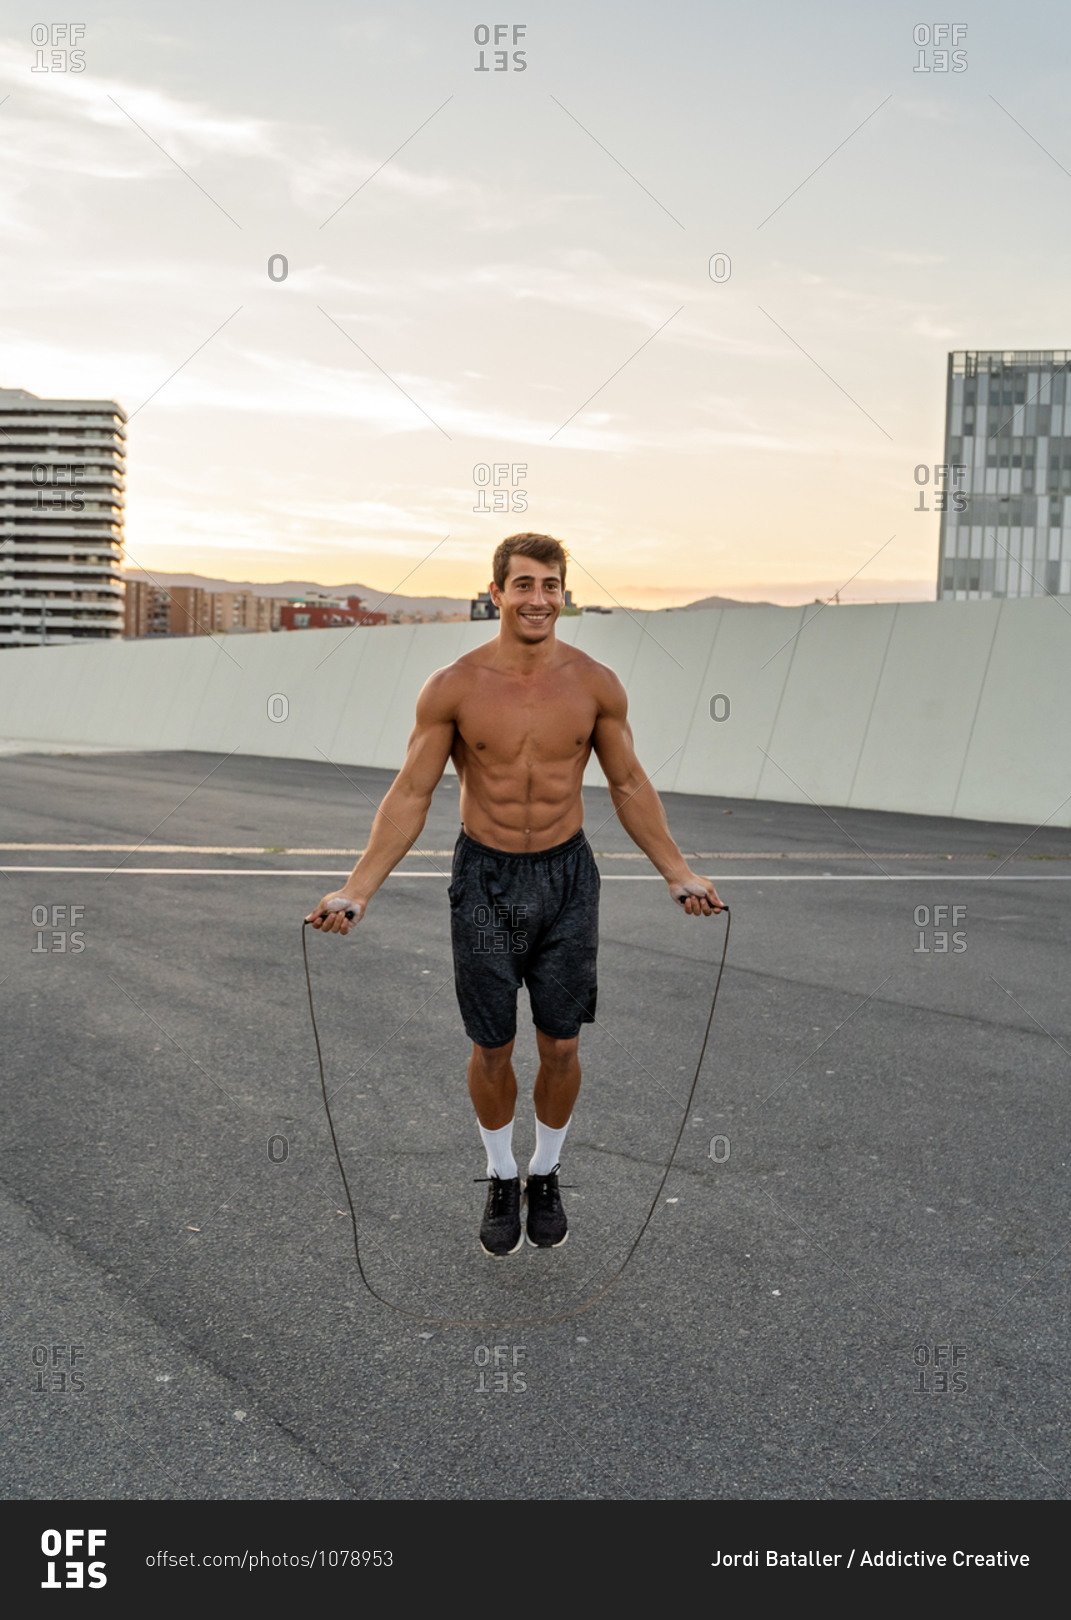 Young smiling muscular male athlete jumping rope on roadway during workout under shiny sky in evening and looking forward